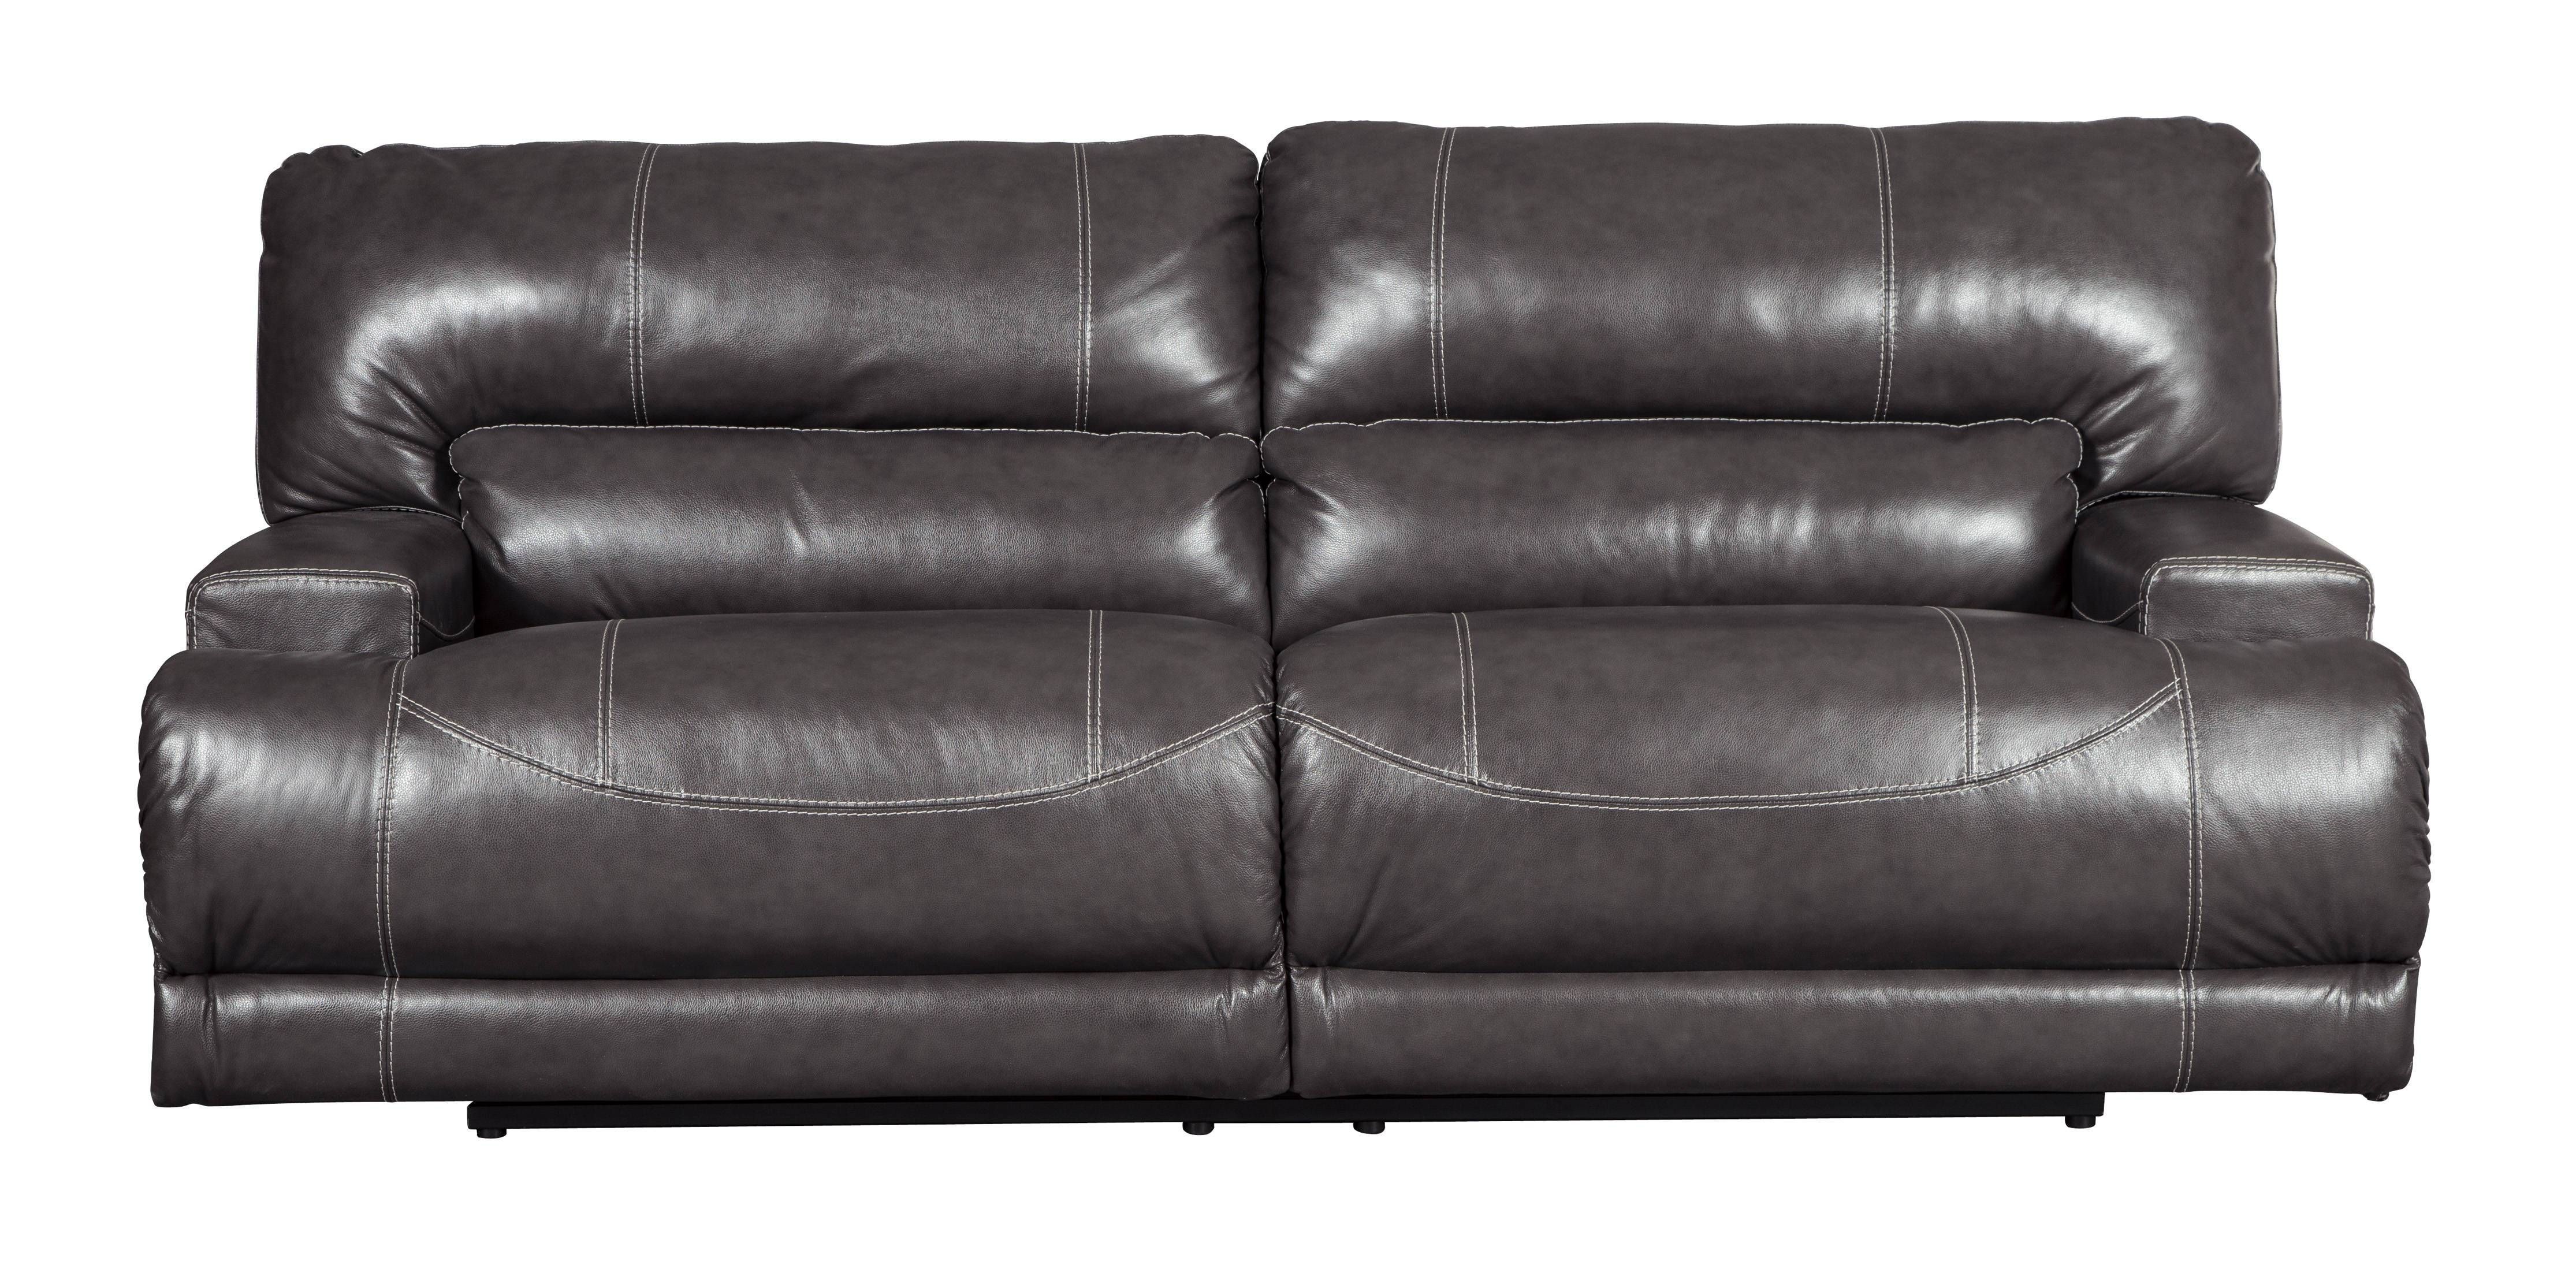 Mccaskill Contemporary Gray Leather 2 Seat Reclining Sofa | Living With Regard To 2 Seat Recliner Sofas (View 20 of 30)